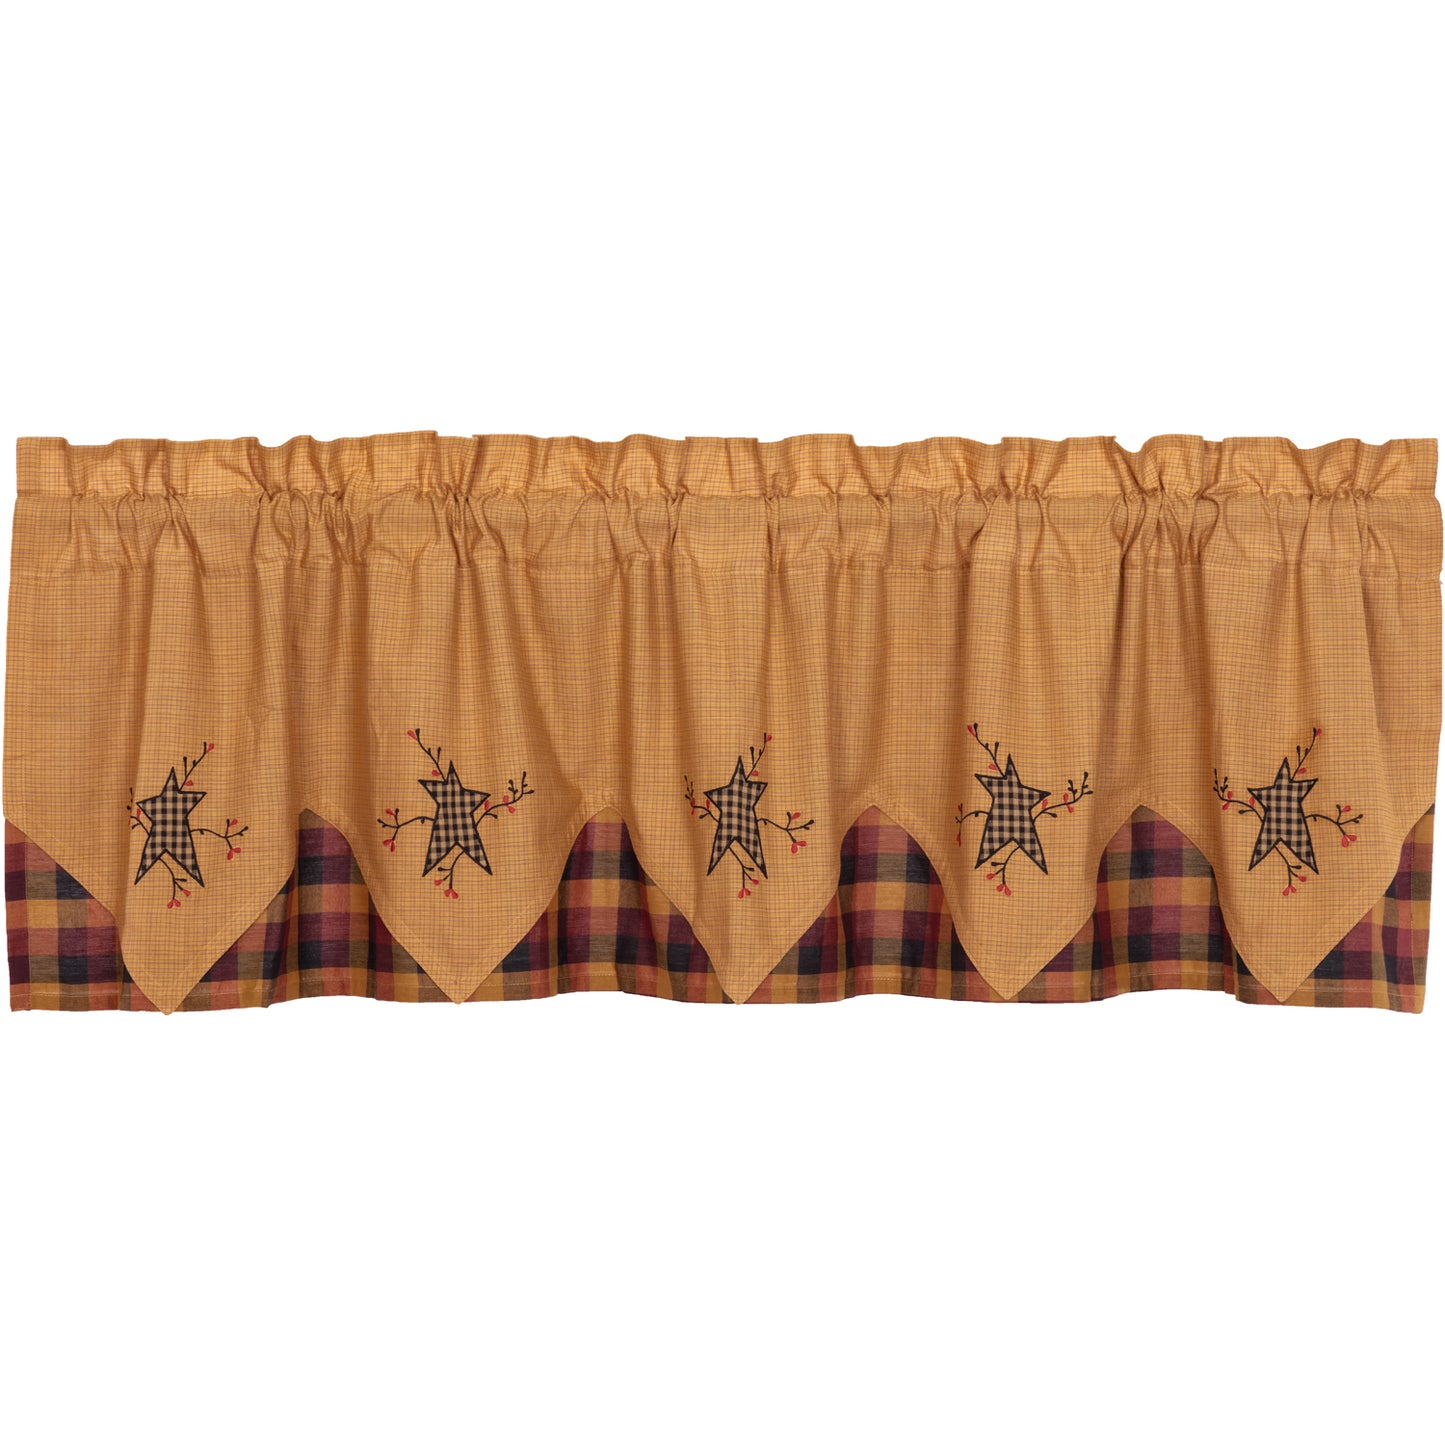 52201-Heritage-Farms-Primitive-Star-and-Pip-Valance-Layered-20x72-image-6